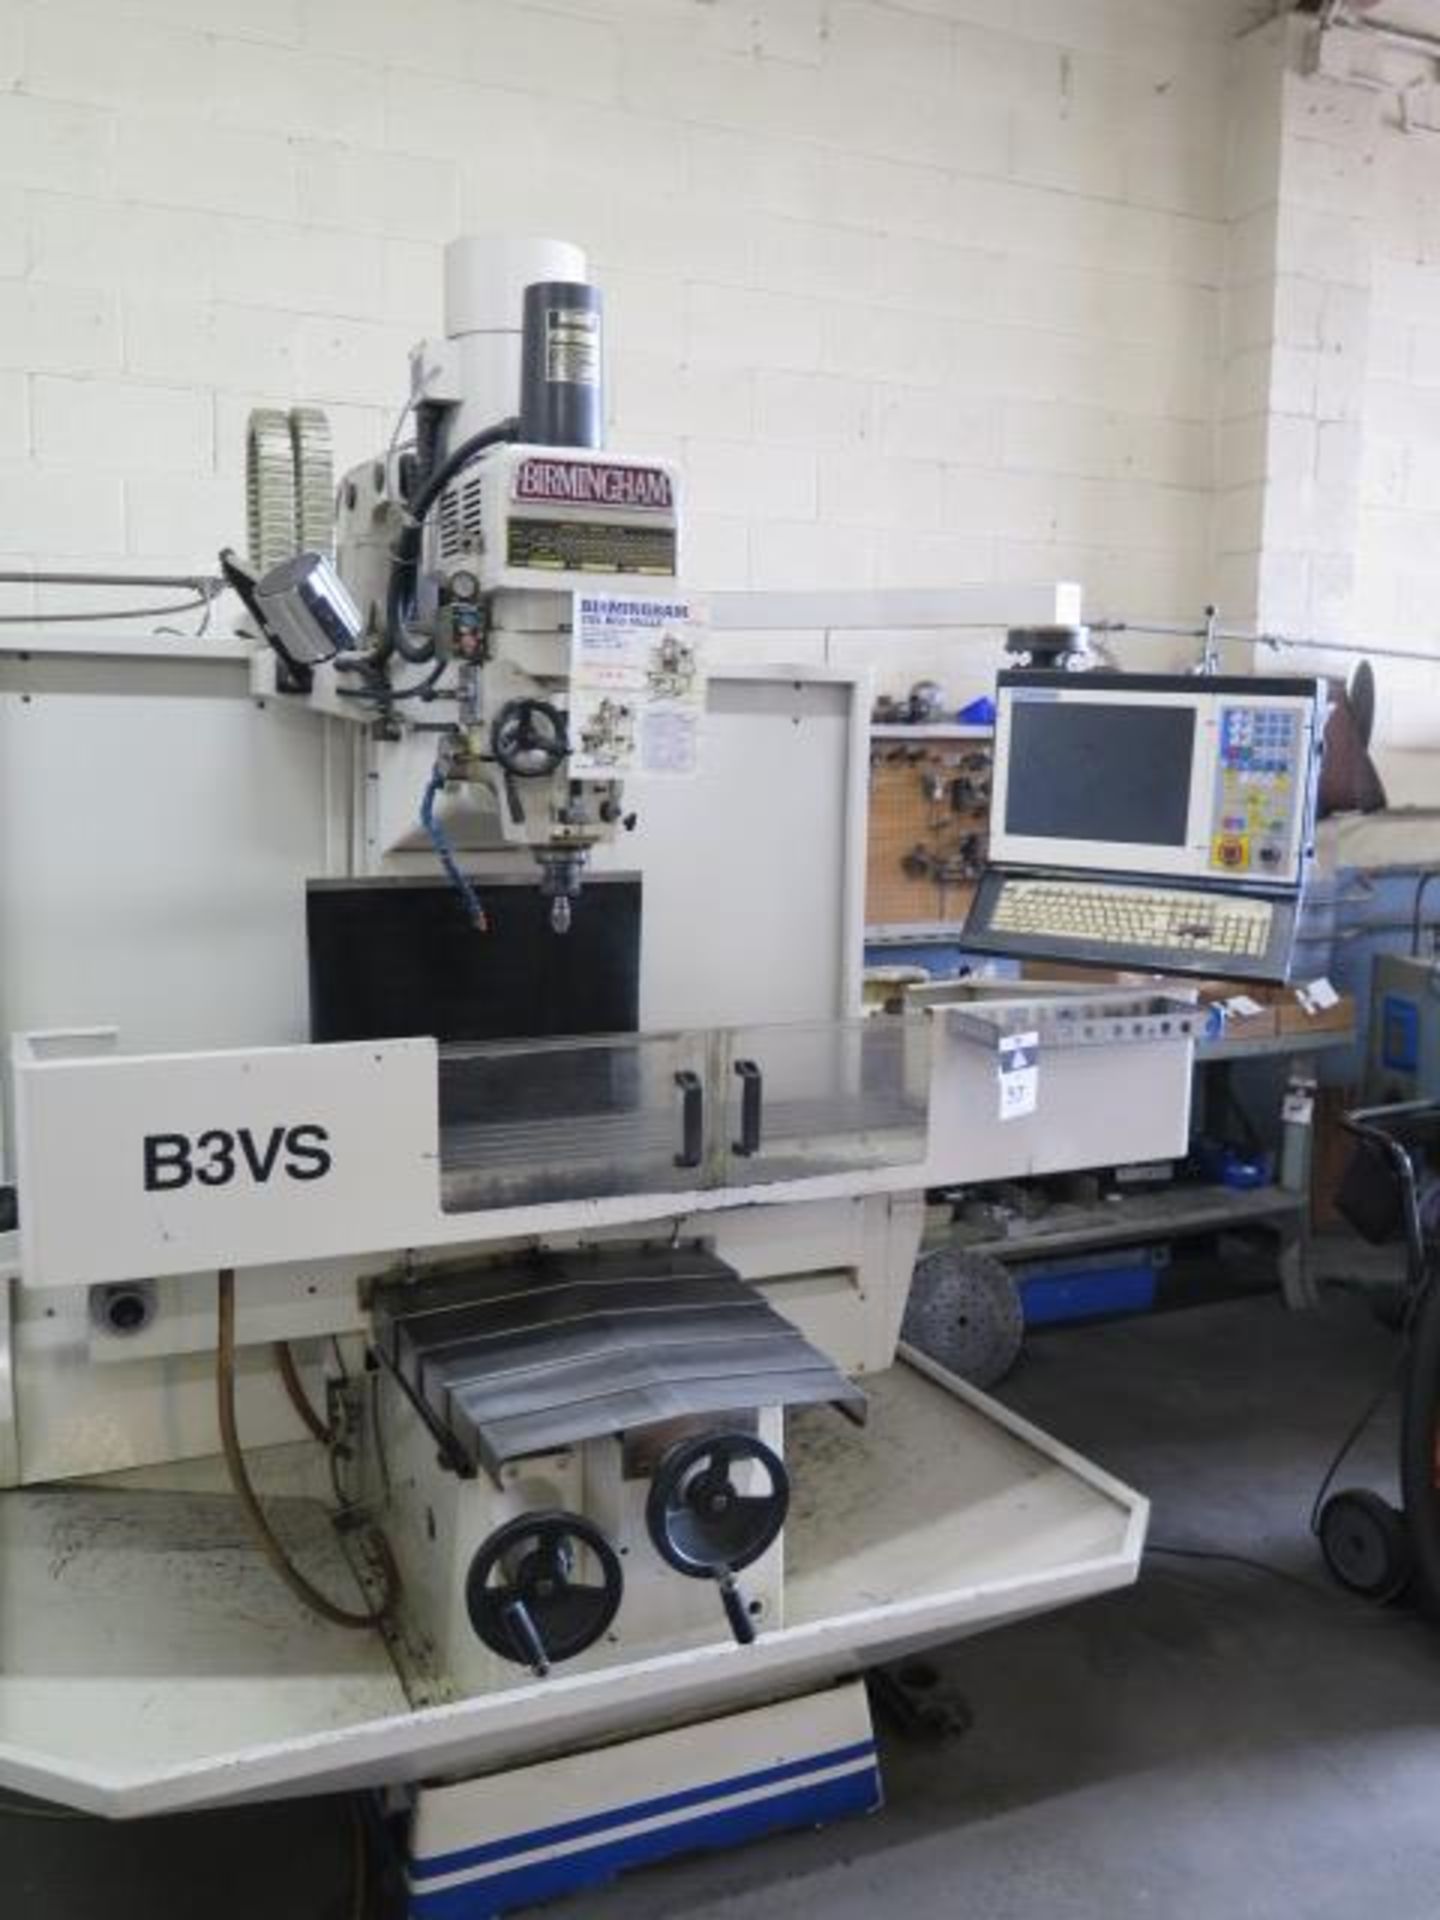 Birmingham BRV-B3VS 2-Axis CNC Mill s/n 011454 w/ Centroid Controls, 40-Taper Spindle, SOLD AS IS - Image 2 of 15